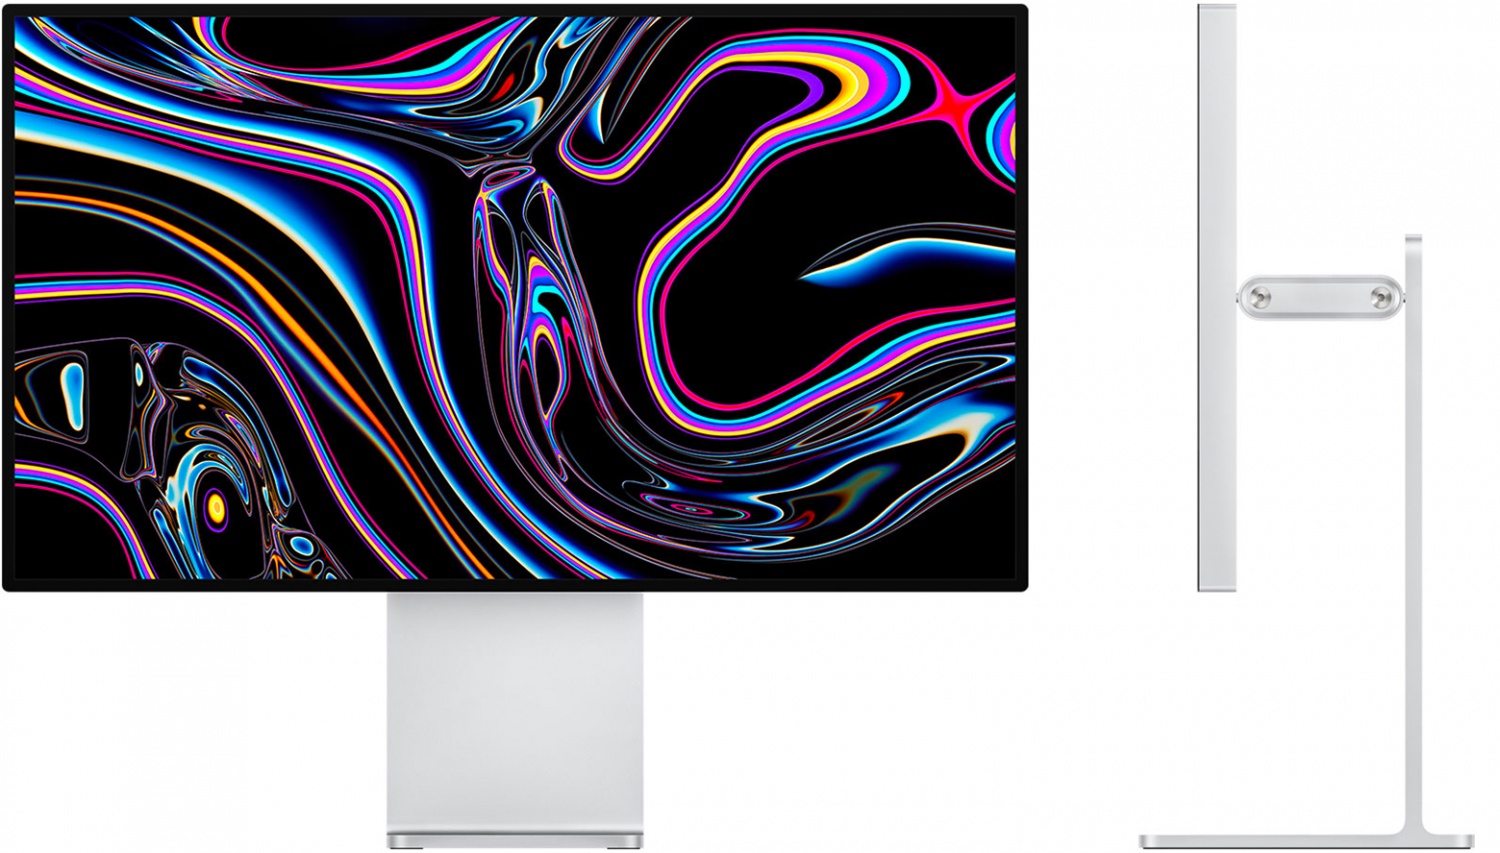 Apple Is Reportedly Working on New Mac Monitor That Could Act as Smart Home Display Using iOS Device Chip